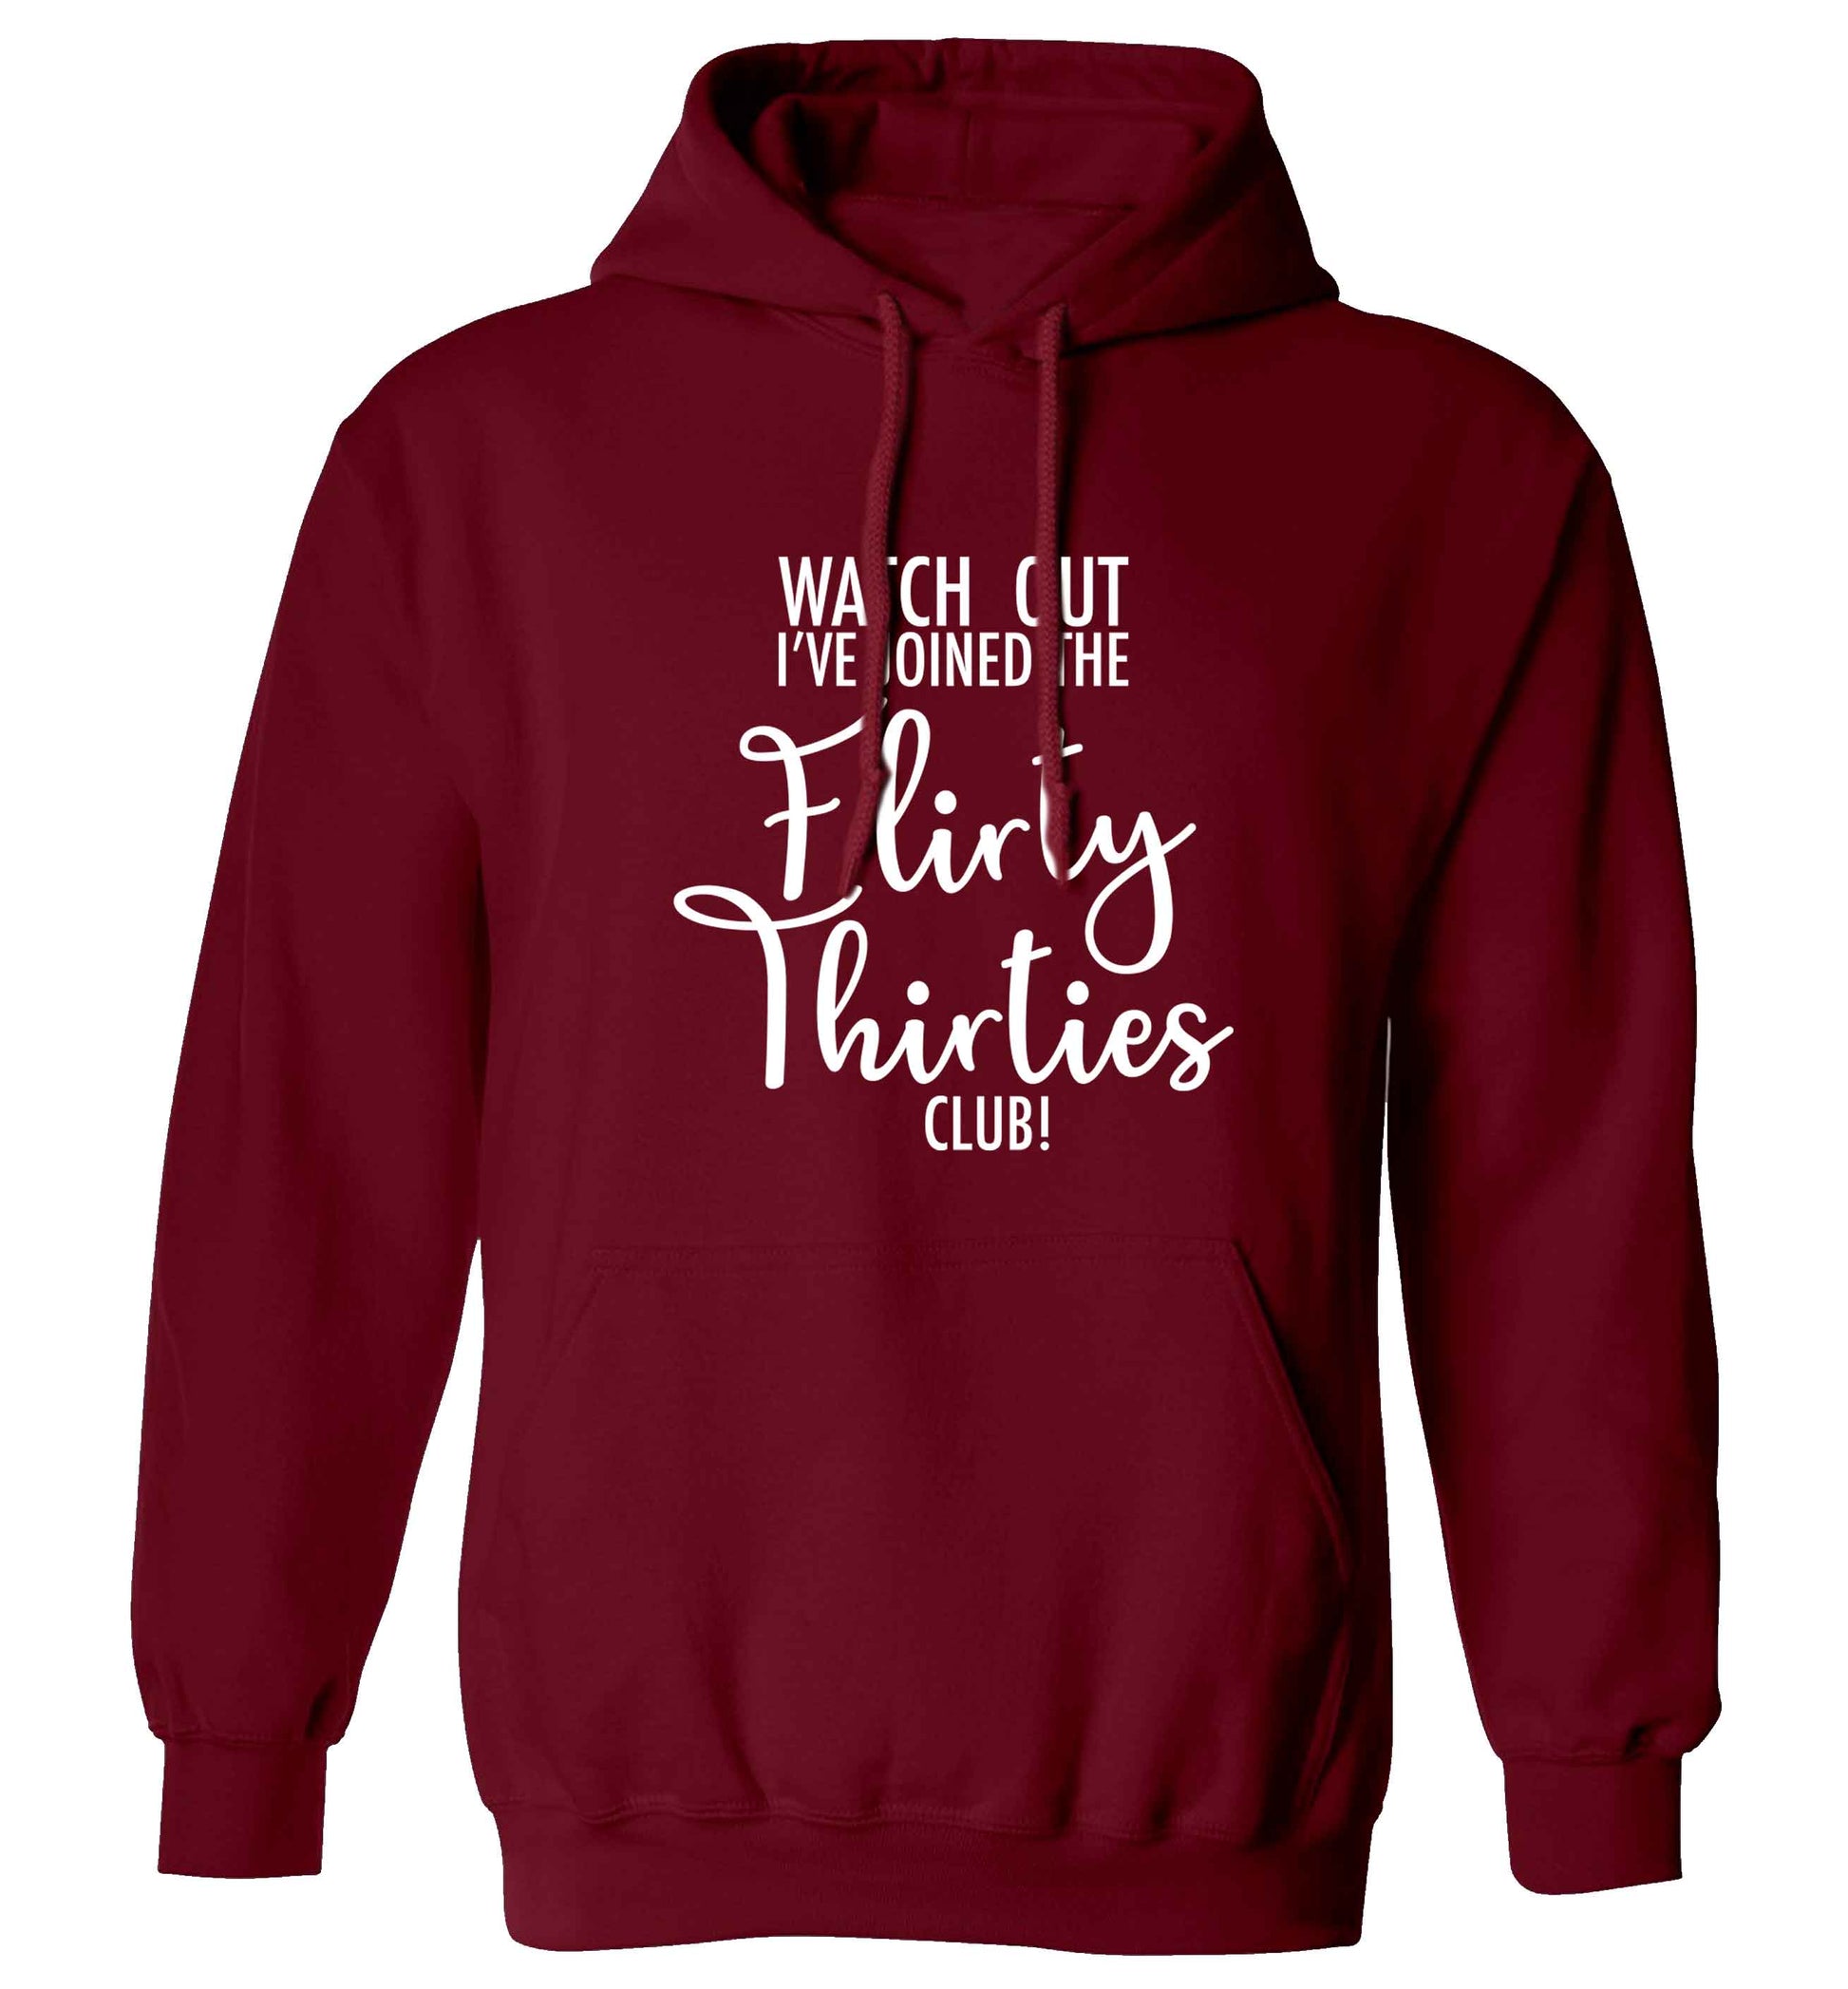 Watch out I've joined the flirty thirties club adults unisex maroon hoodie 2XL